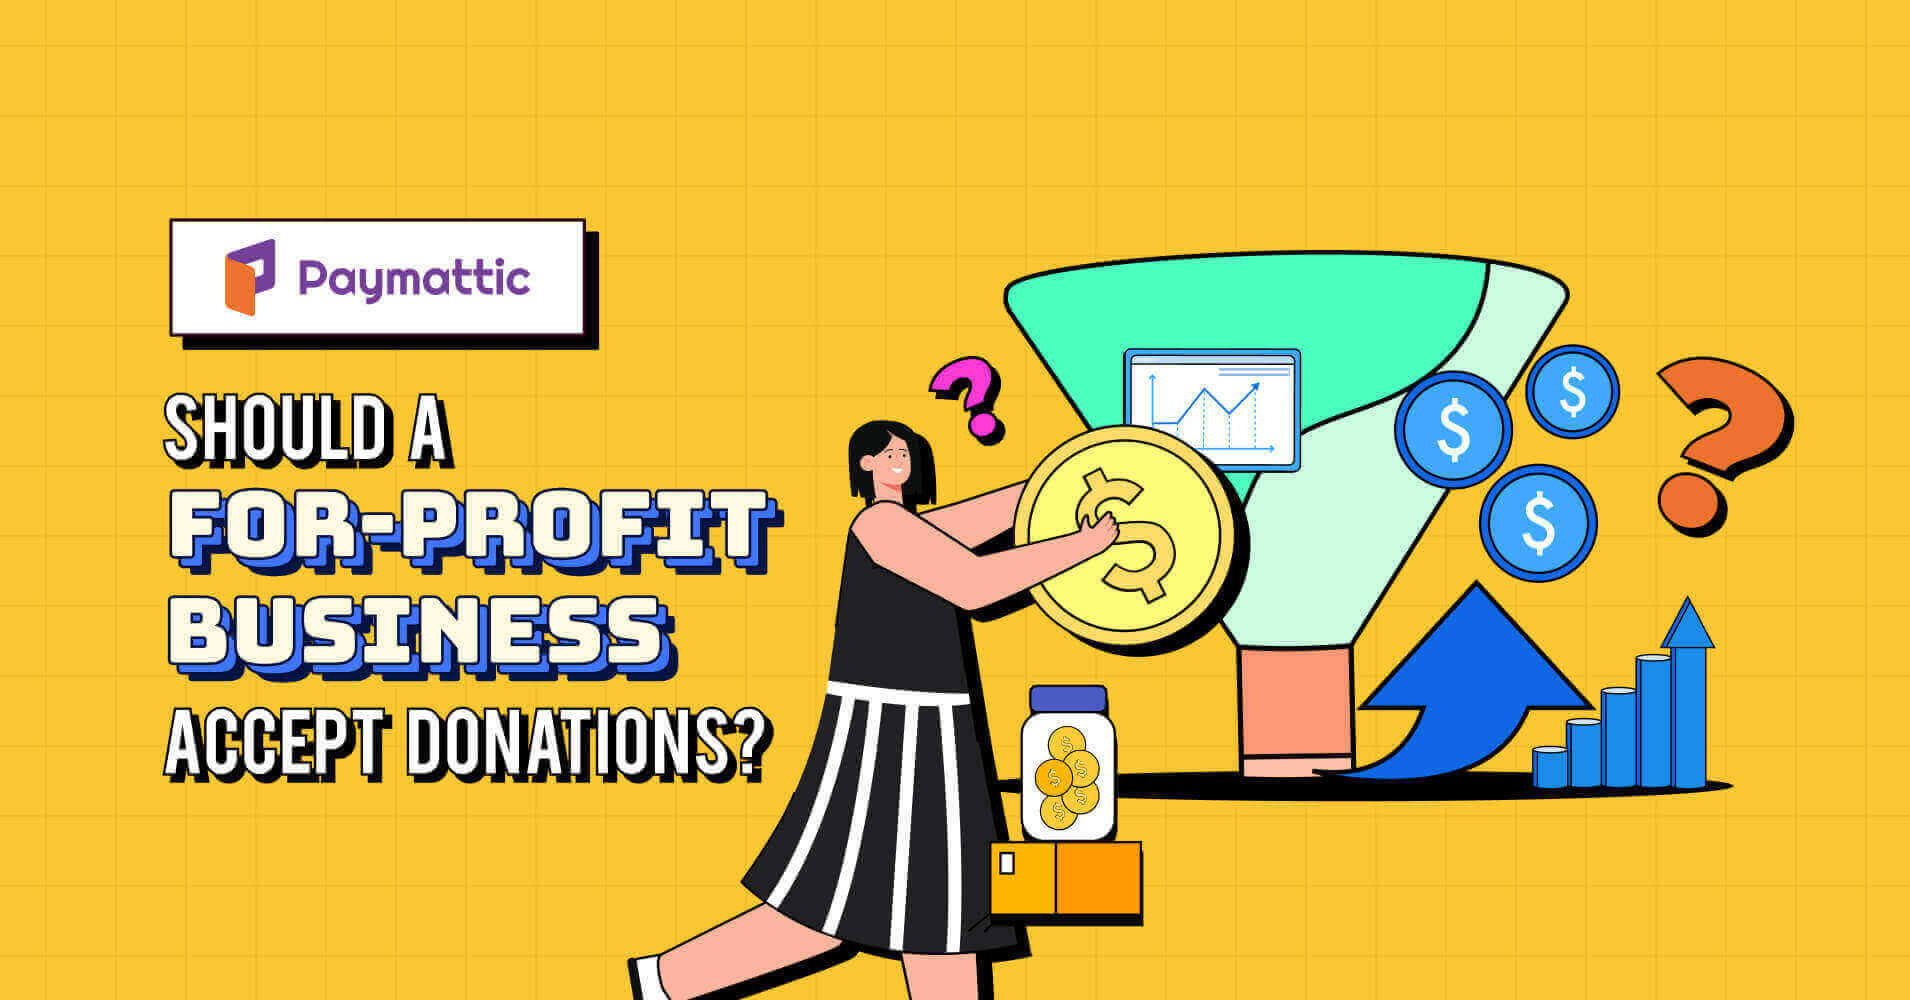 Can a For-Profit Business Accept Donations?